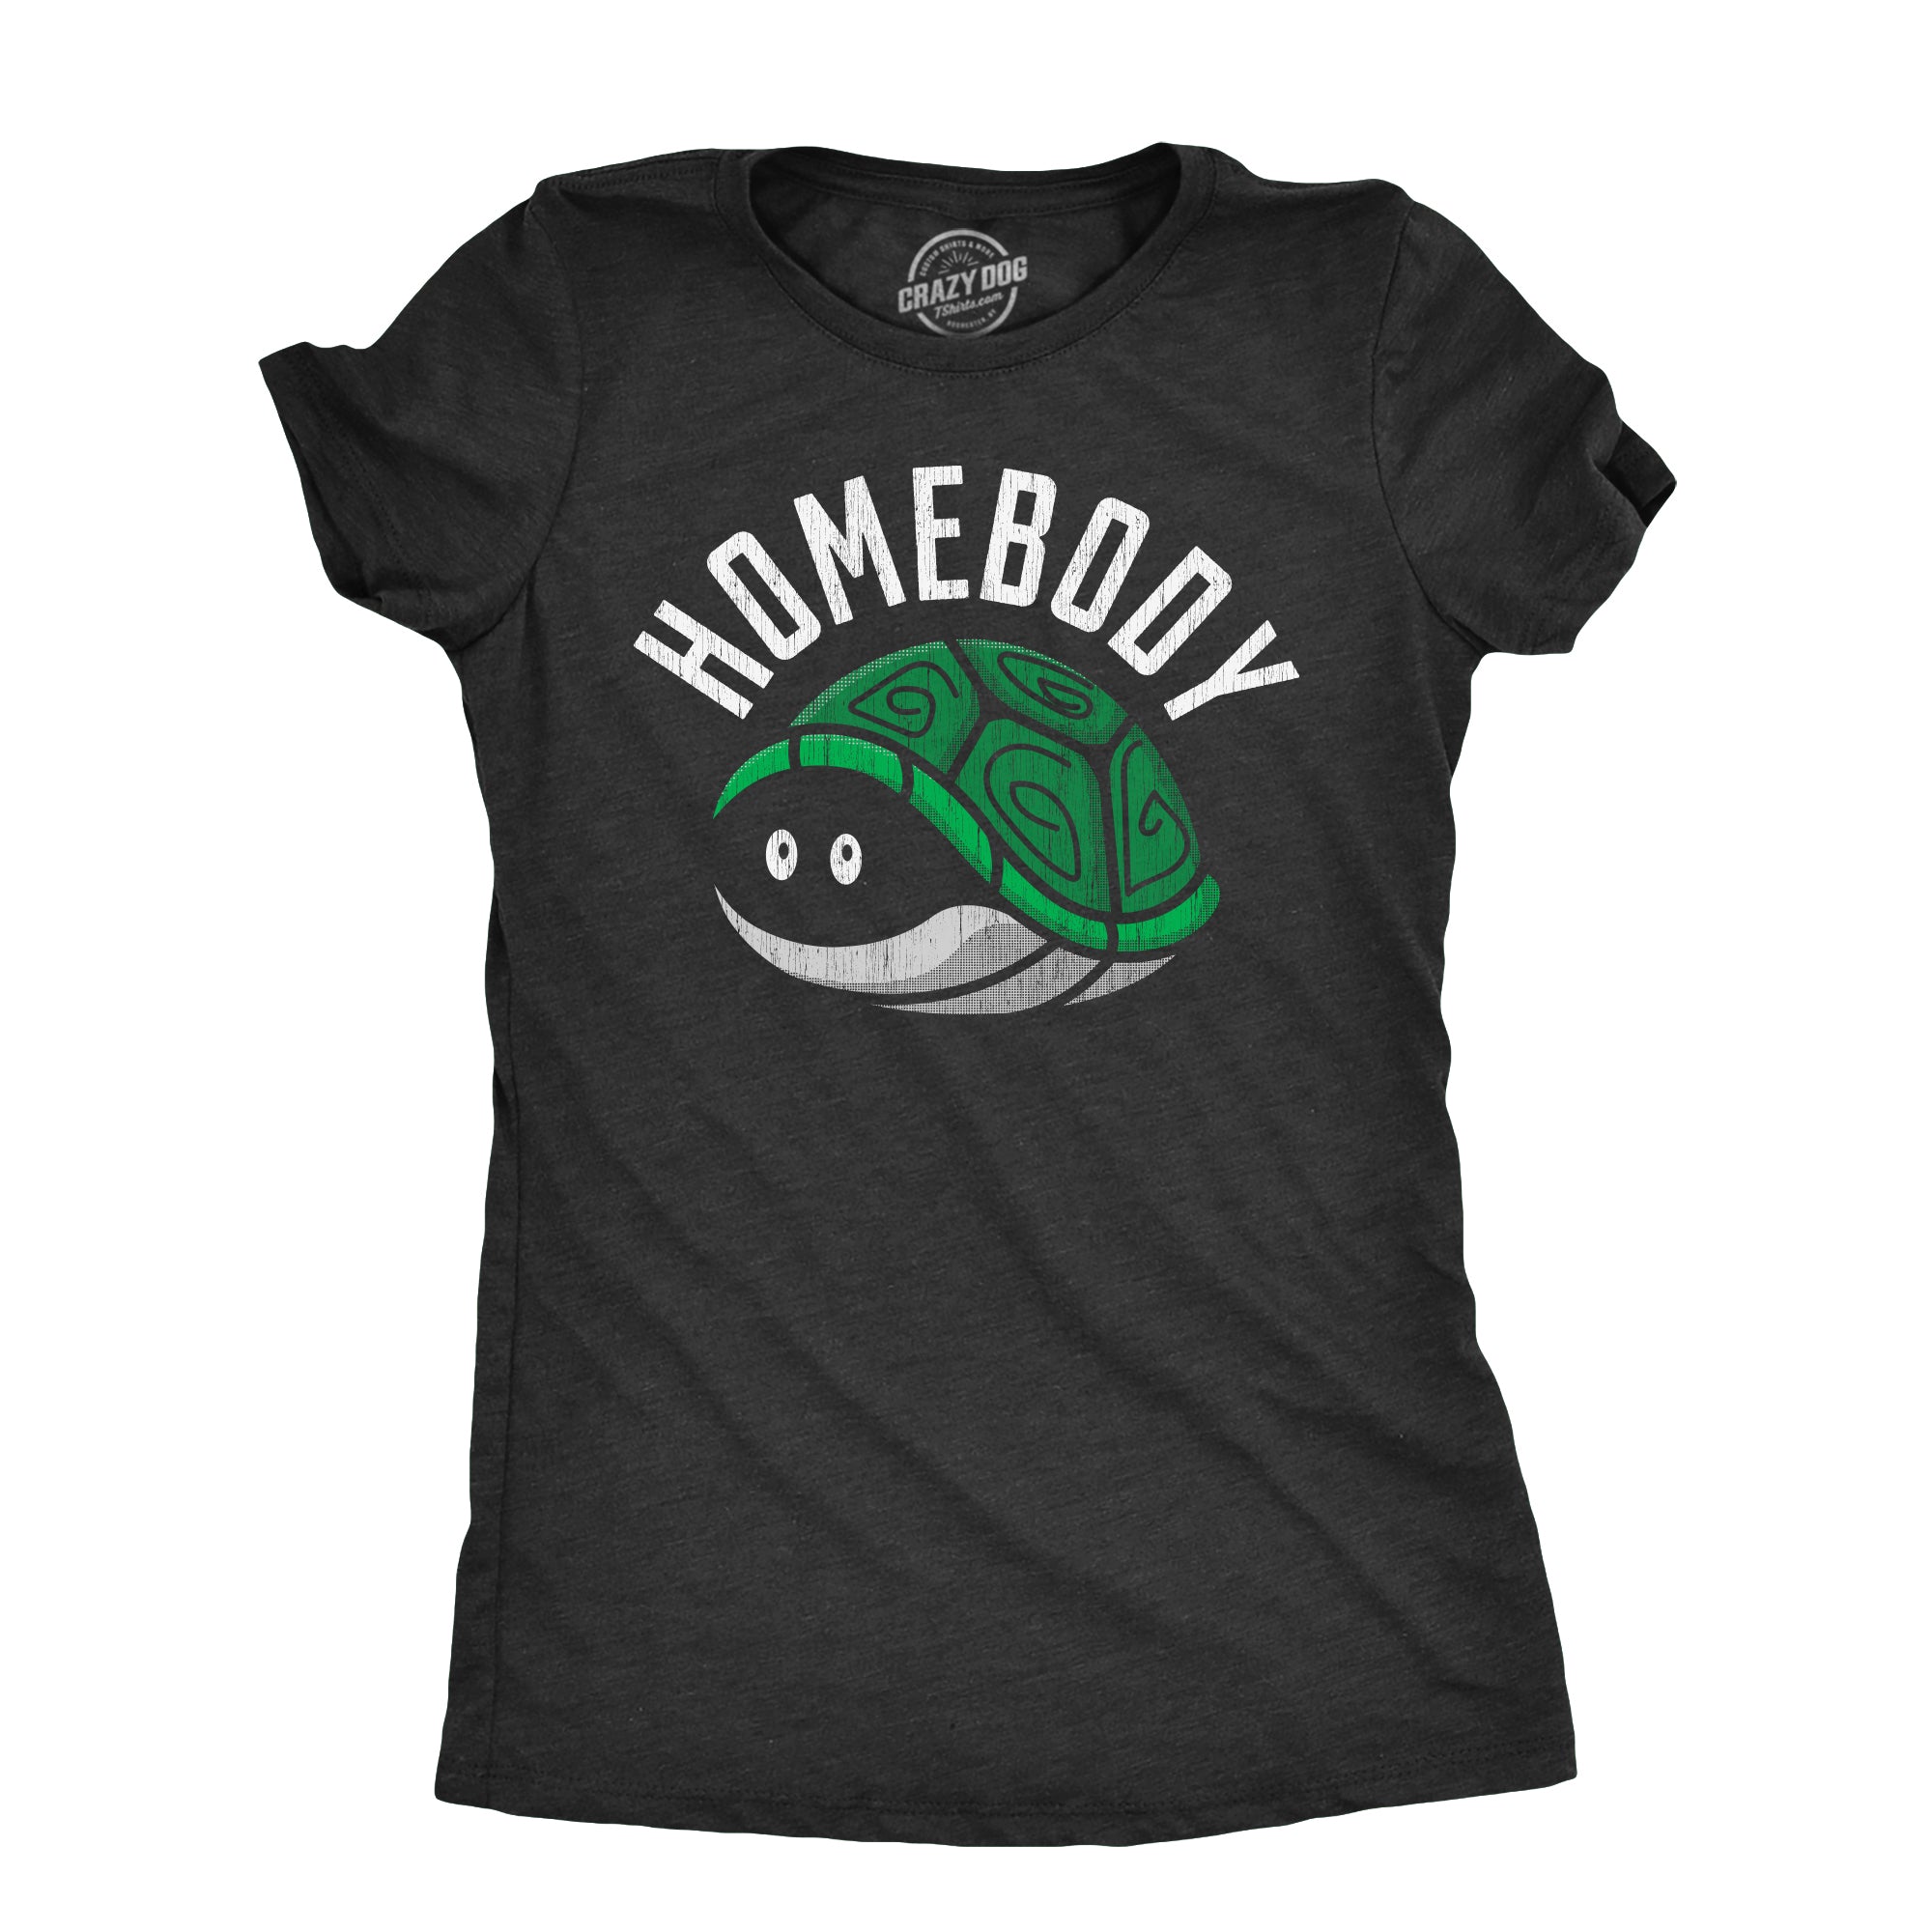 Funny Heather Black - HOMEBODY Homebody Womens T Shirt Nerdy Introvert sarcastic Tee